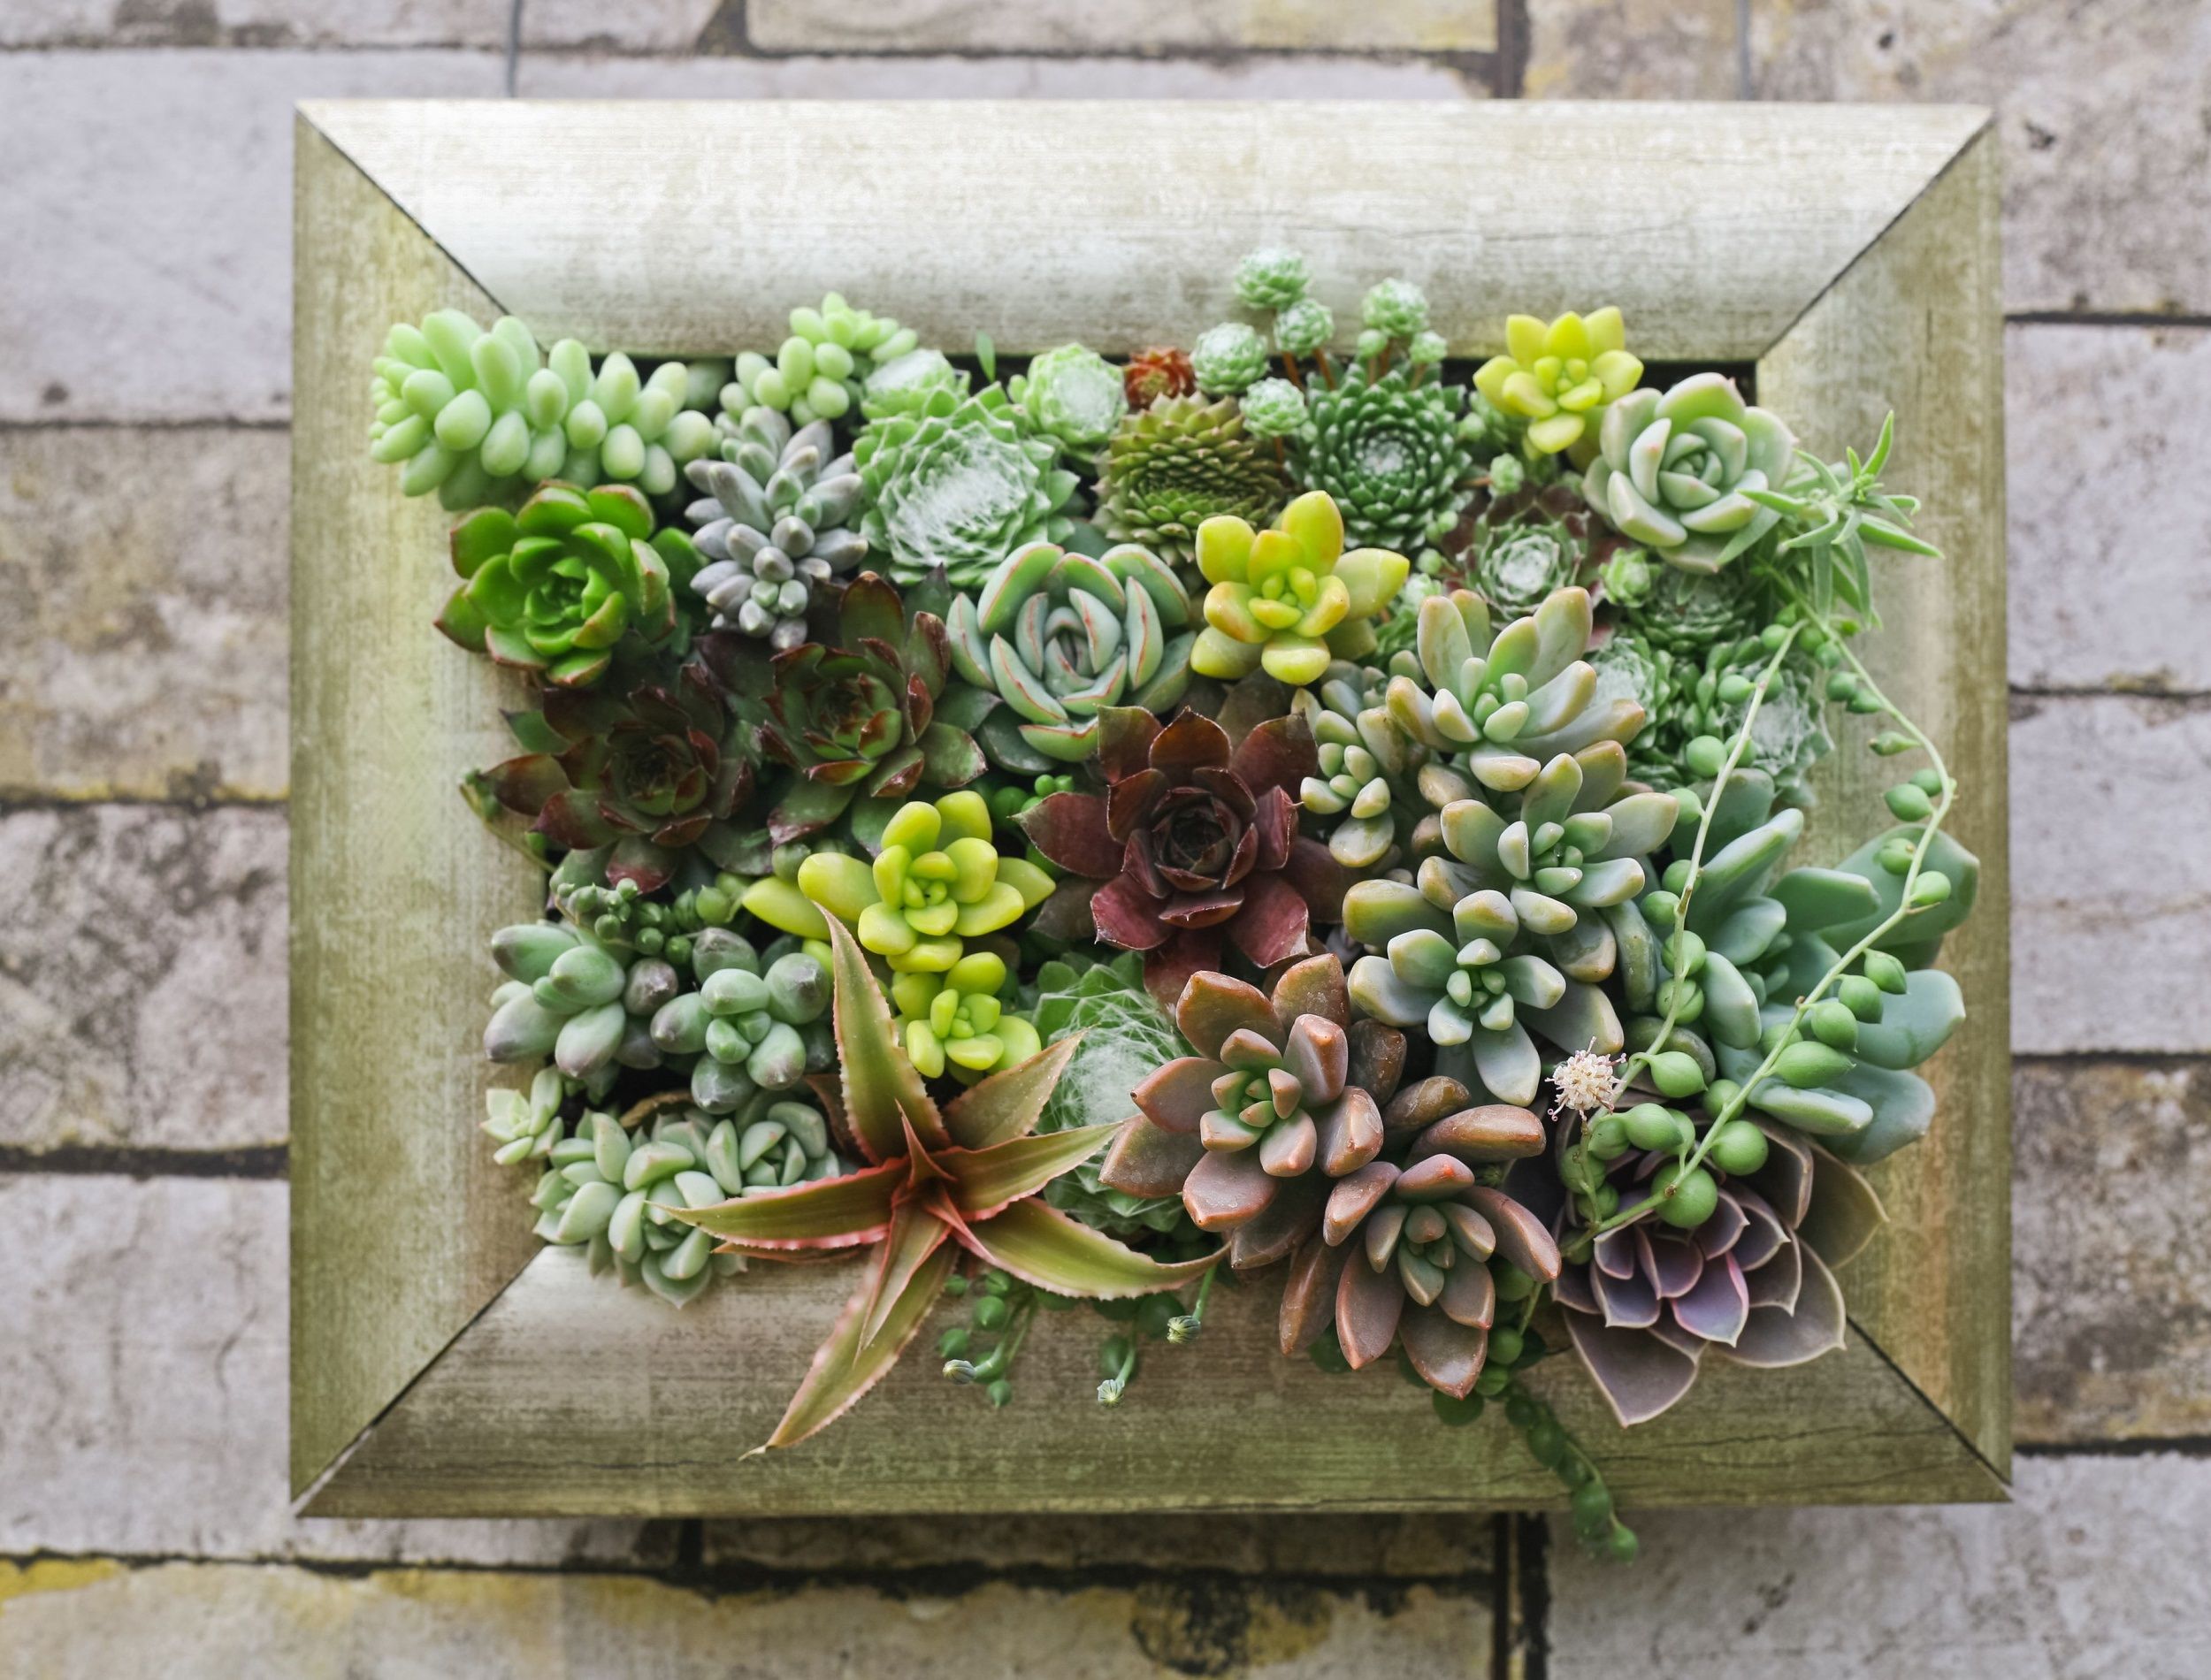 Living succulent picture or vertical succulent garden in a frame on the wall